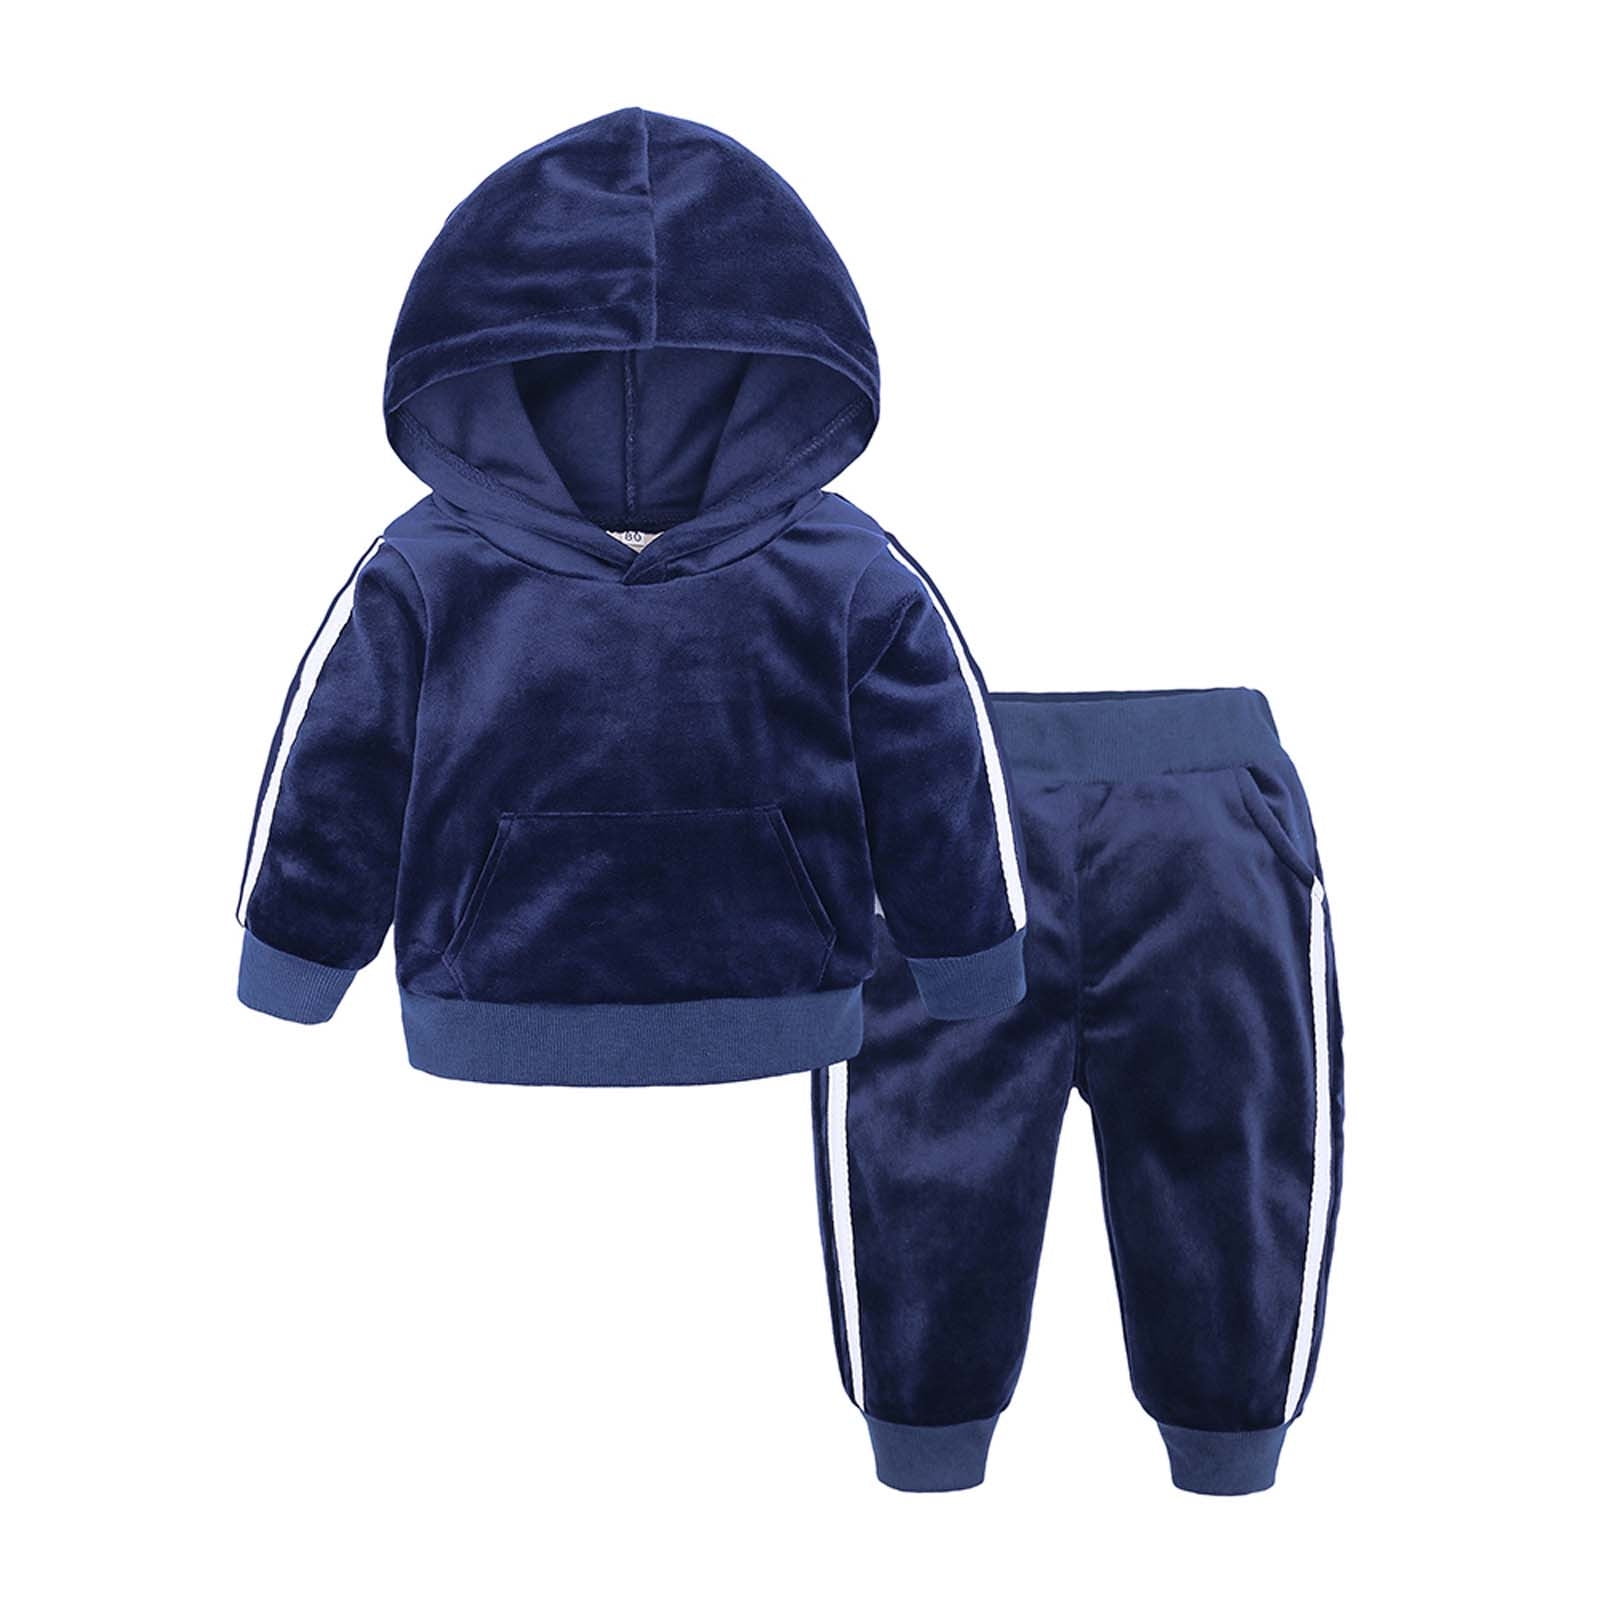 Owordtank Boys Girls' Velvet Pants Set - 2 Piece Long Sleeve Hoodies with  Pockets and Sweat Pants Winter Outfit for Toddler Kids